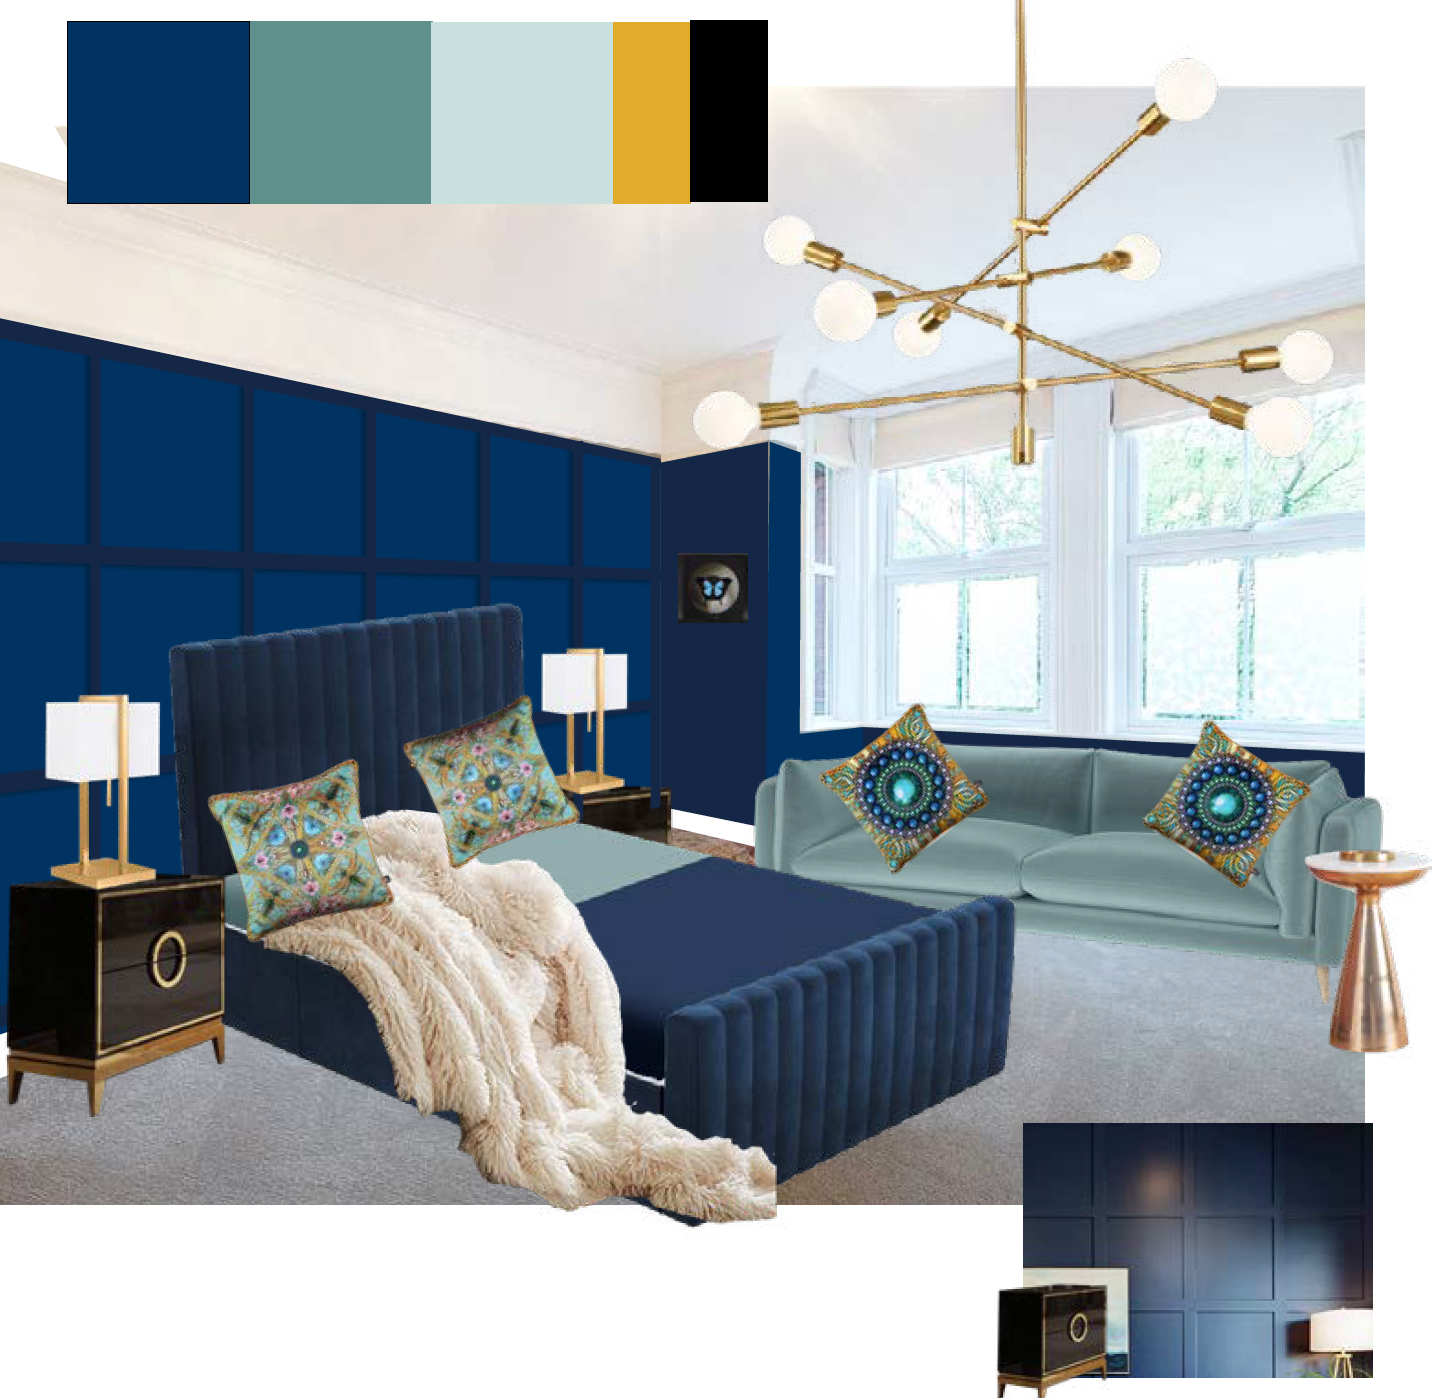 House of Curious: Moodboarding the Guest Bedroom – The Curious Department